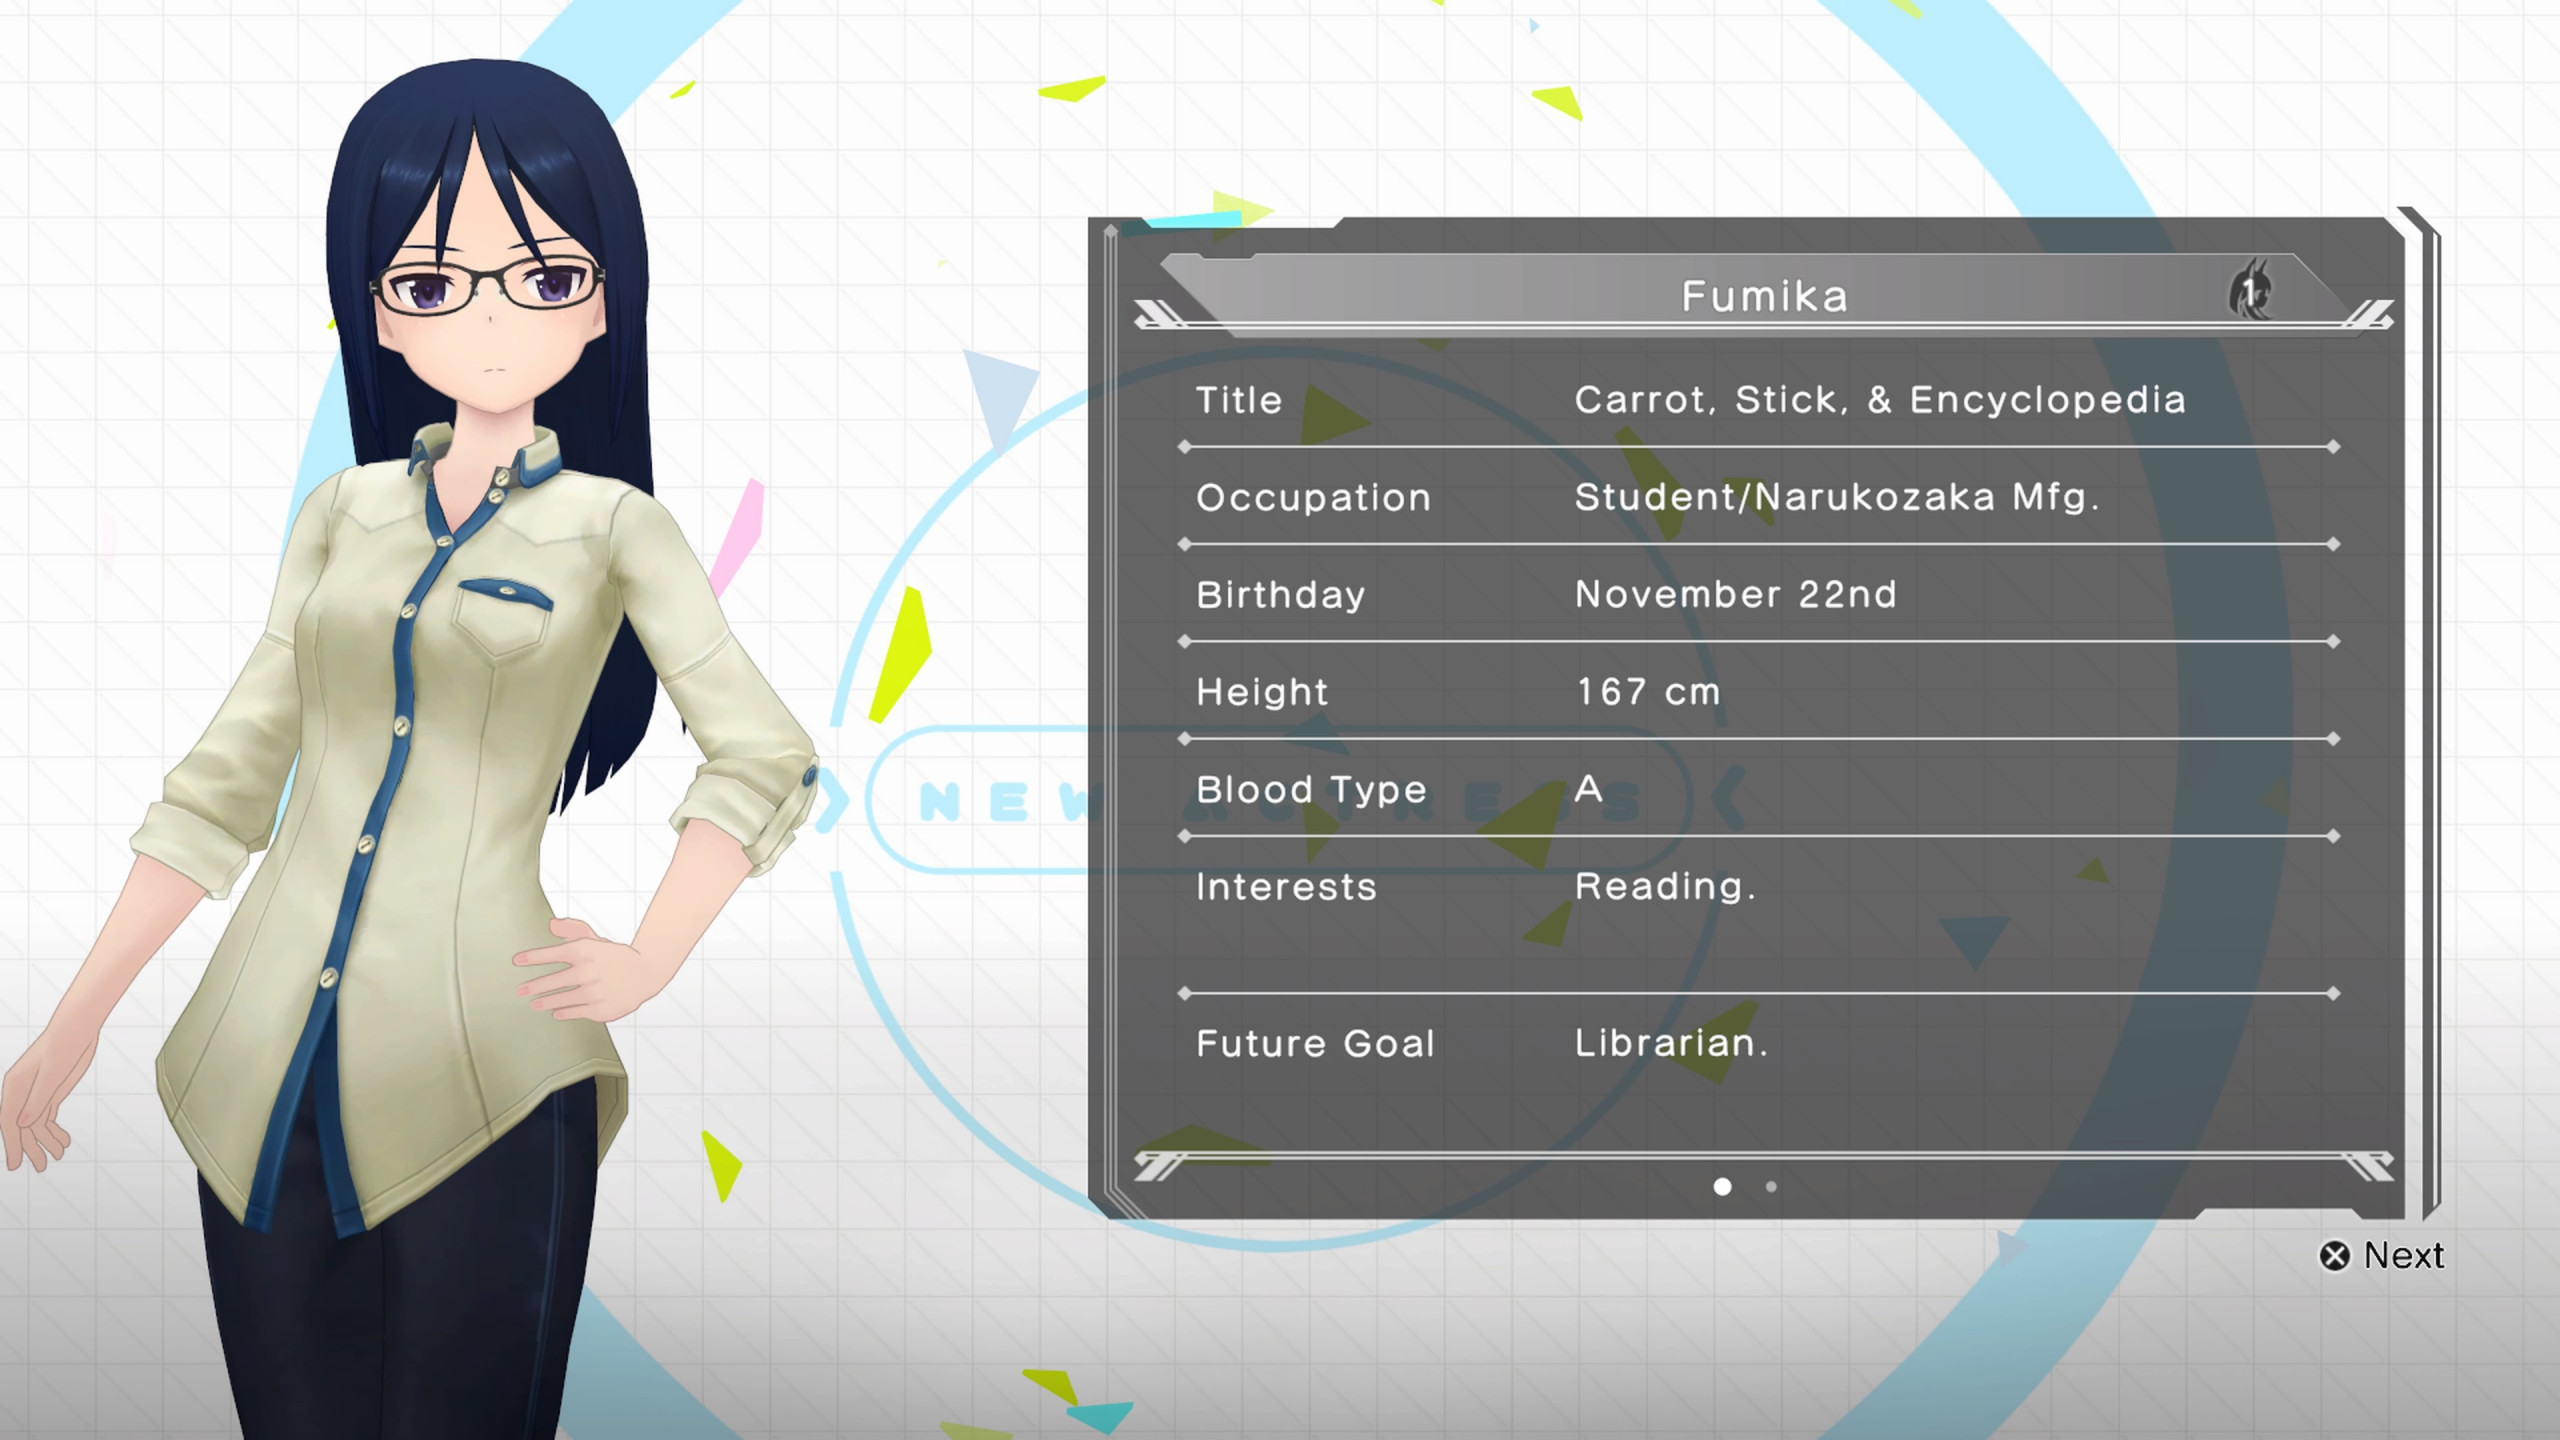 A girl with blue hair. Wearing a buttoned shirt with blue strip going down and glasses. Right side is the bio to the character listing like/dislikes and blood type.